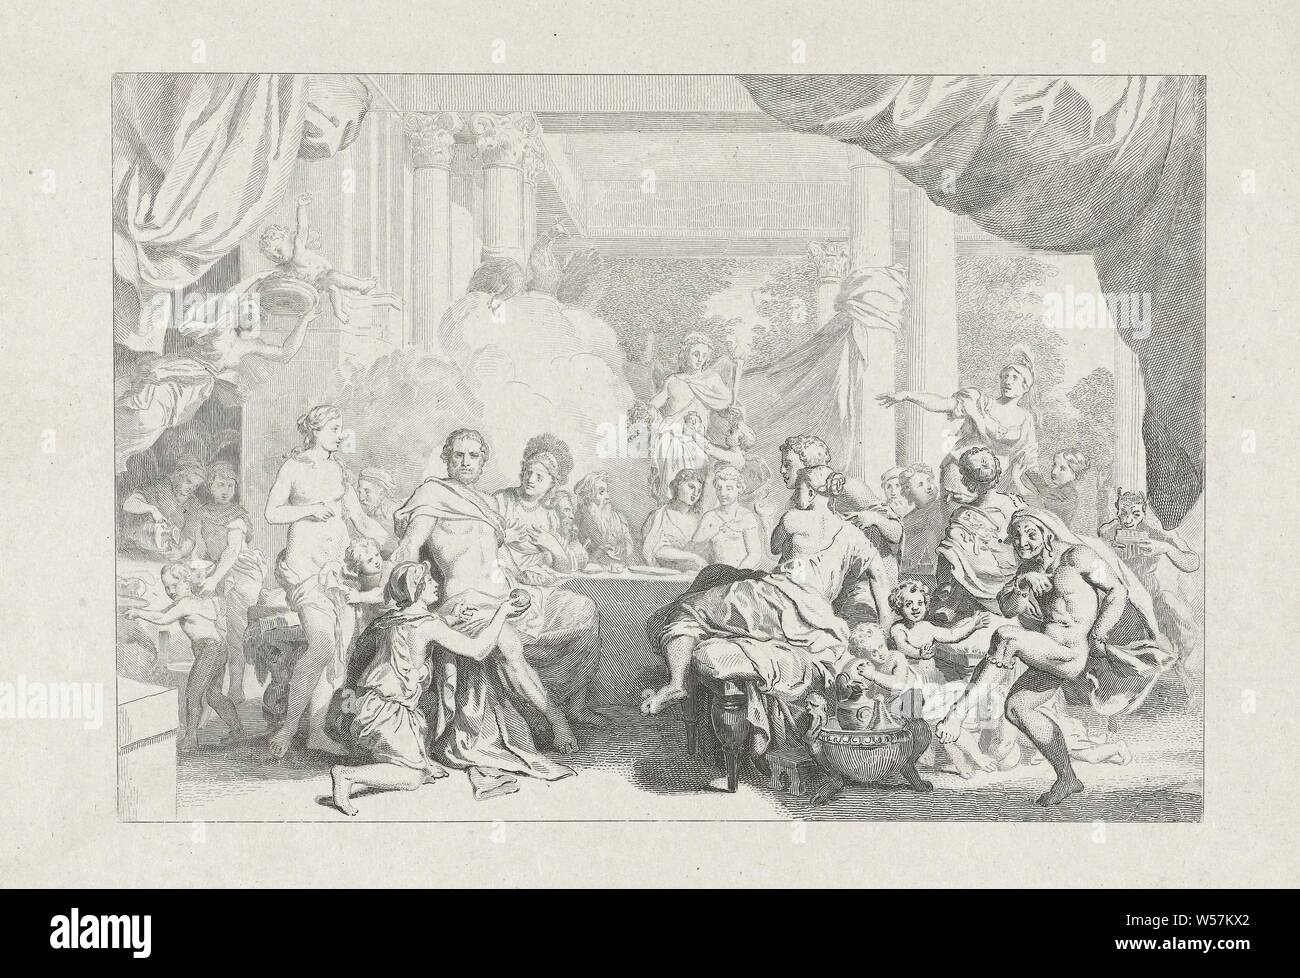 Wedding of Peleus and Thetis, At the wedding of Peleus and Thetis, most of the guests sit at the large table and others frolic around a bit. While Momus is dancing, Mercury Jupiter, who is sitting next to Juno, offers an apple. In the background you can see a cloud with the two peacocks of Juno, (story of) Mercury (Hermes), wedding feast, wedding meal, attributes of Juno, Johann Wilhelm Kaiser (I), 1823 - 1900, paper, etching, h 186 mm × w 265 mm Stock Photo